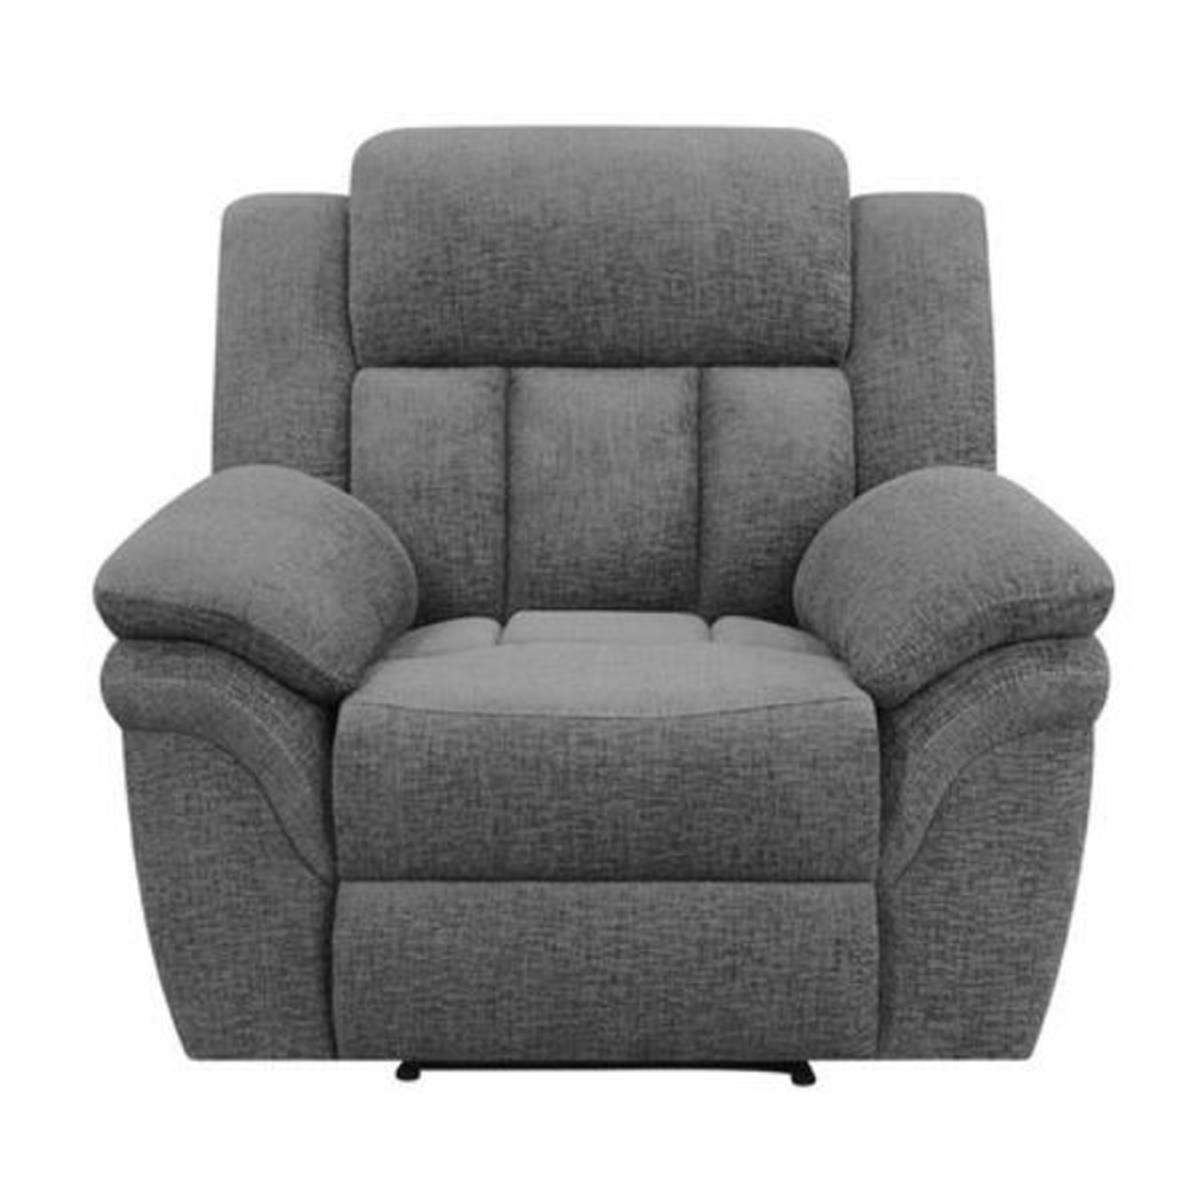 Picture of Coaster Furniture 609543 Bahrain Glider Recliner, Charcoal